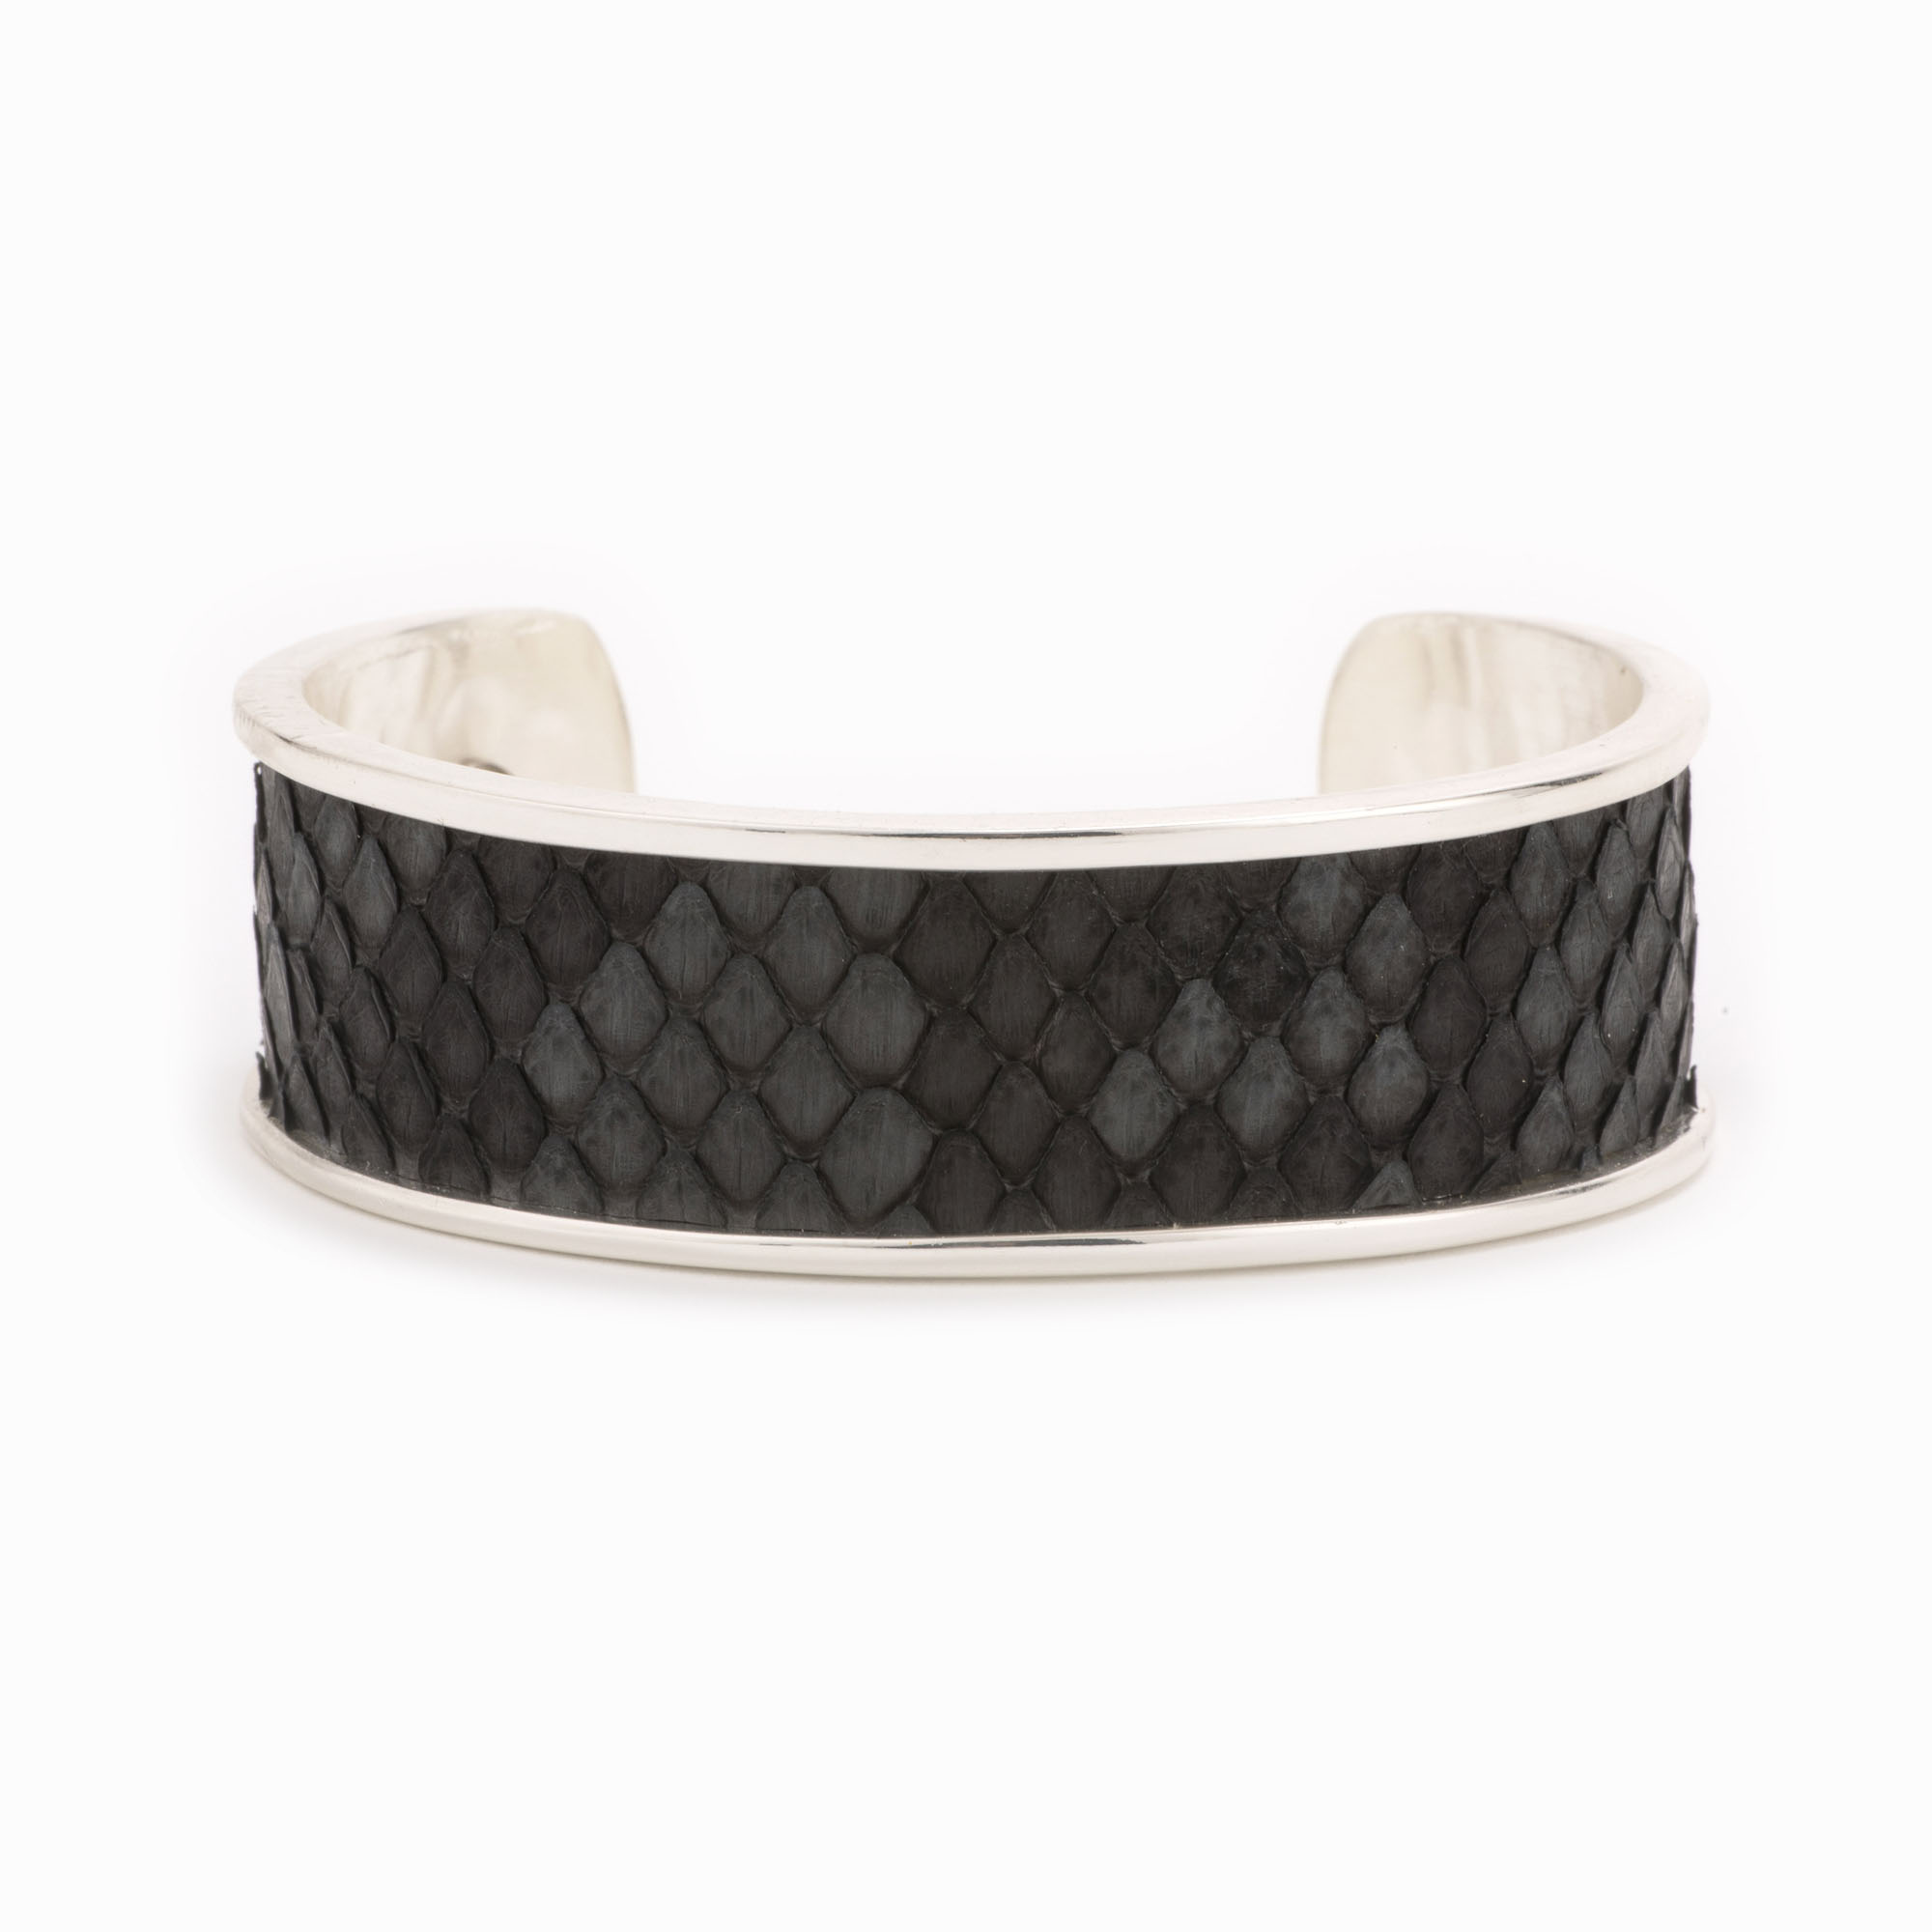 Featured image for “Medium Charcoal Silver Cuff”